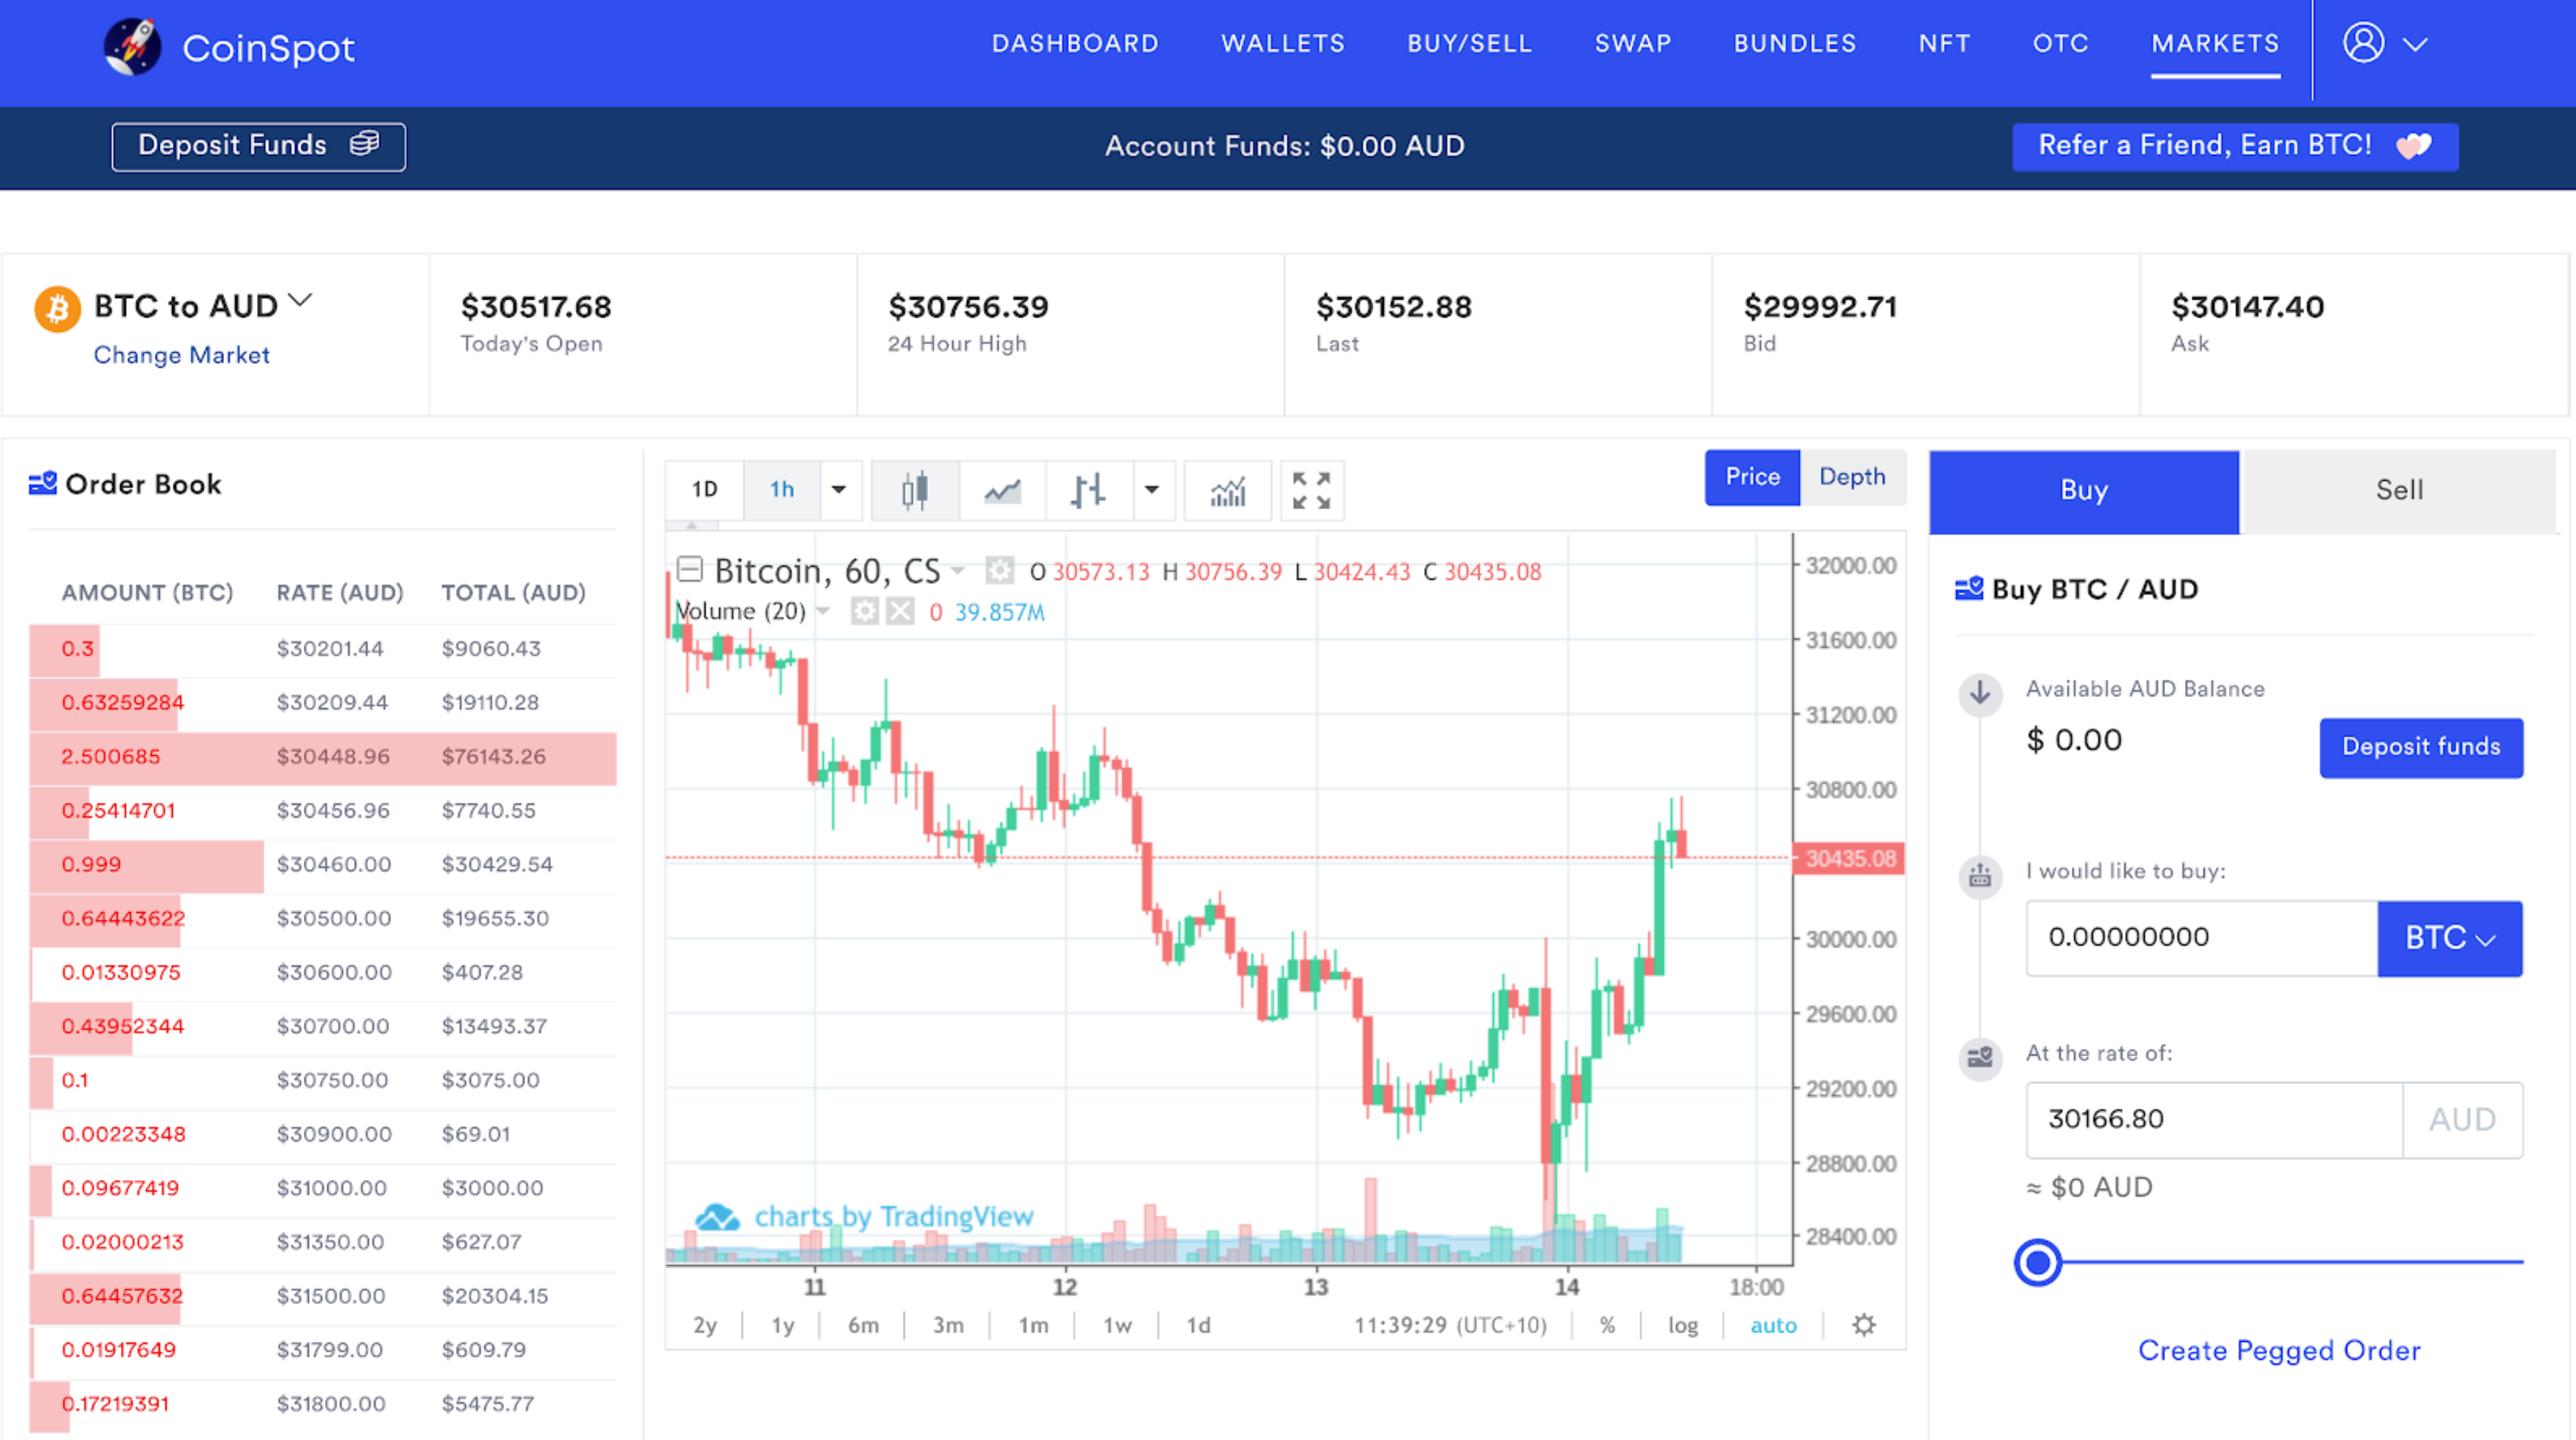 CoinSpot_Markets_-_Market_Page.png